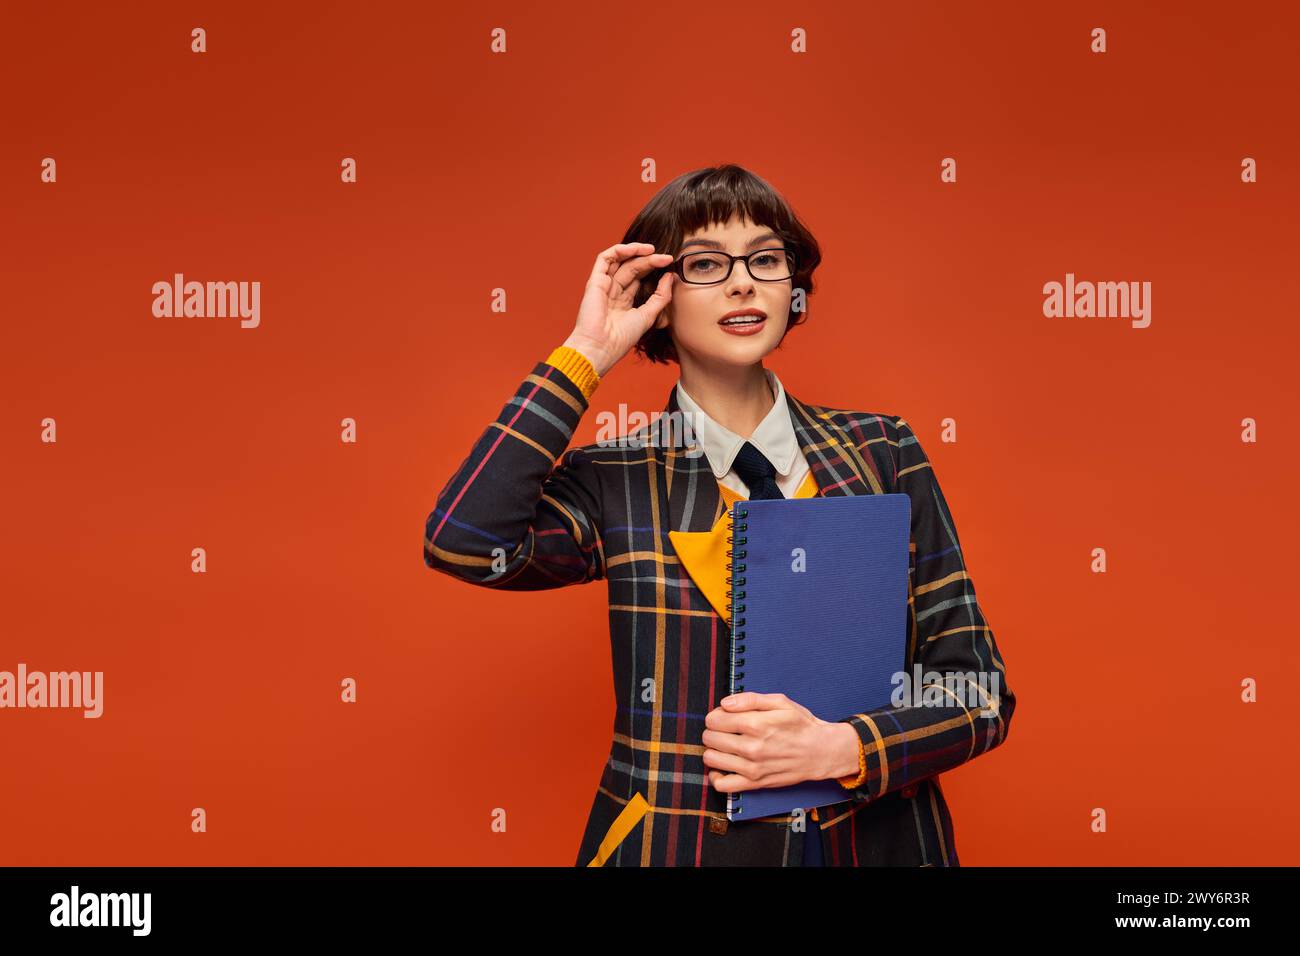 Thoughtful student in college uniform adjusting her glasses and holding notebook on orange backdrop Stock Photo